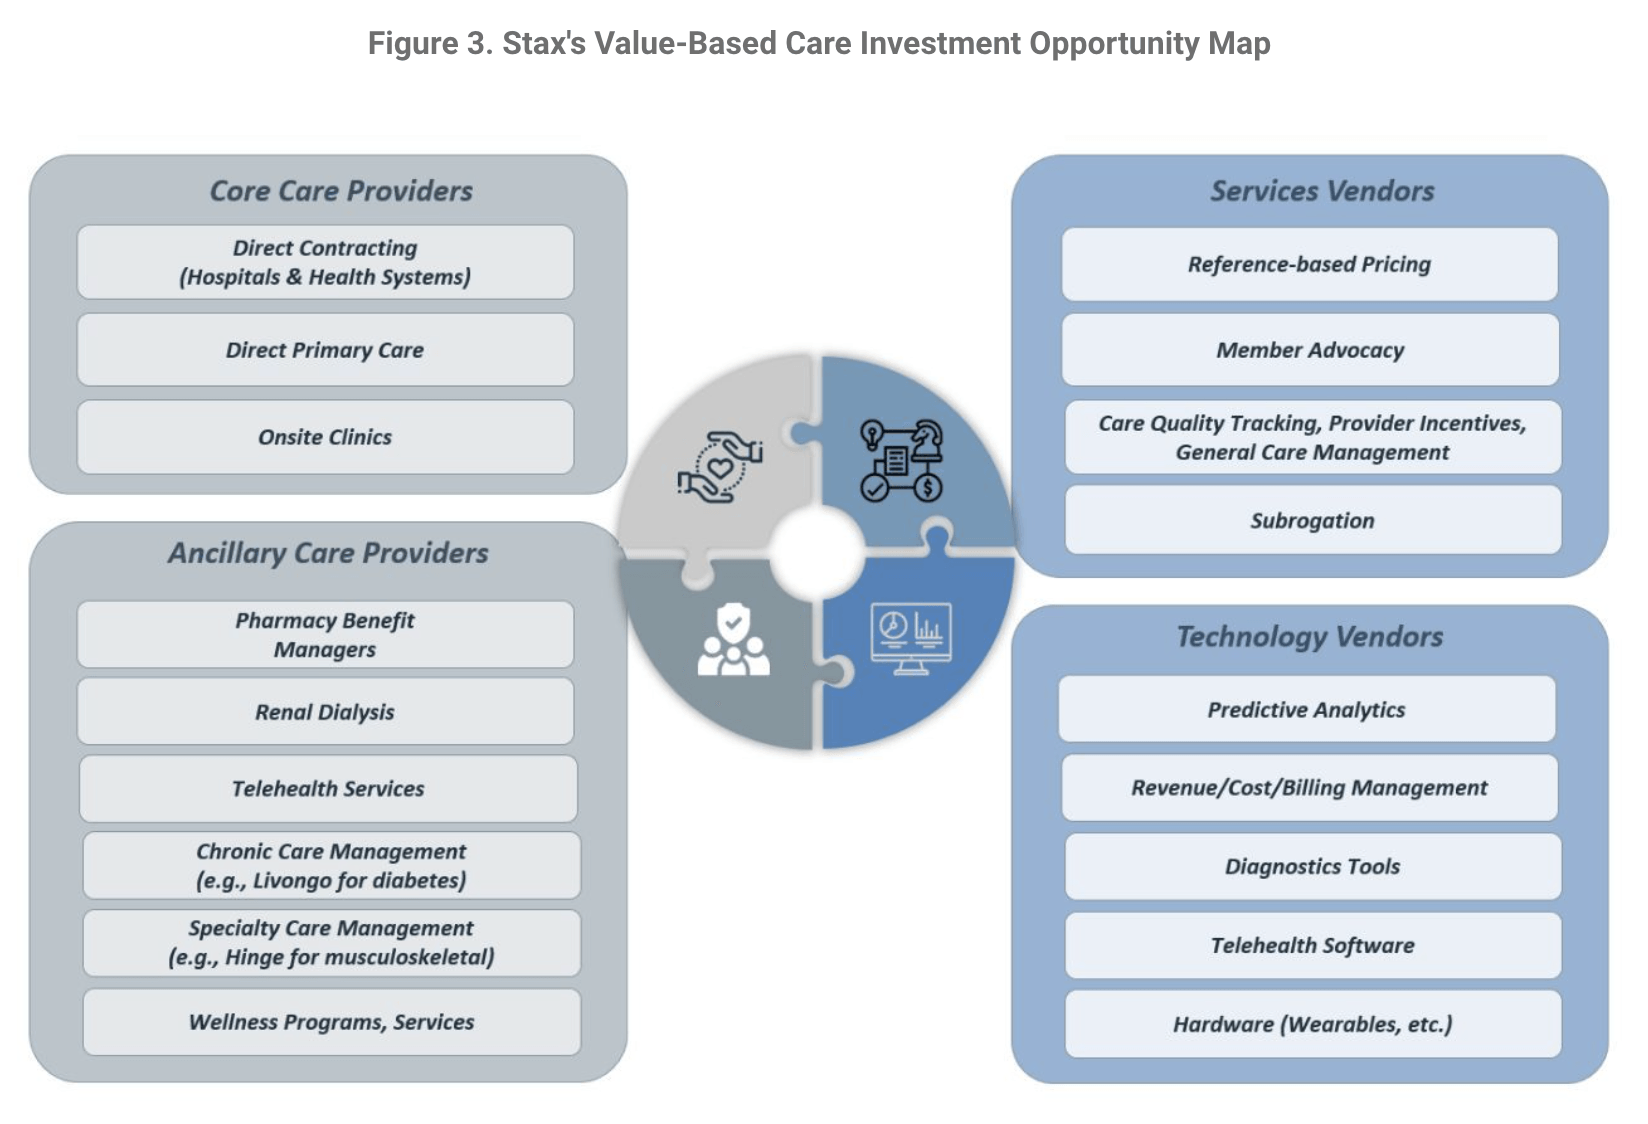 Figure 3.  The emerging value-based solutions for self-insured employers—including services, technologies, and care providers—represent investment opportunities. On the left side are care providers that provide high levels of care at reduced cost. On the right are service and technology vendors that enable the care that is provided.